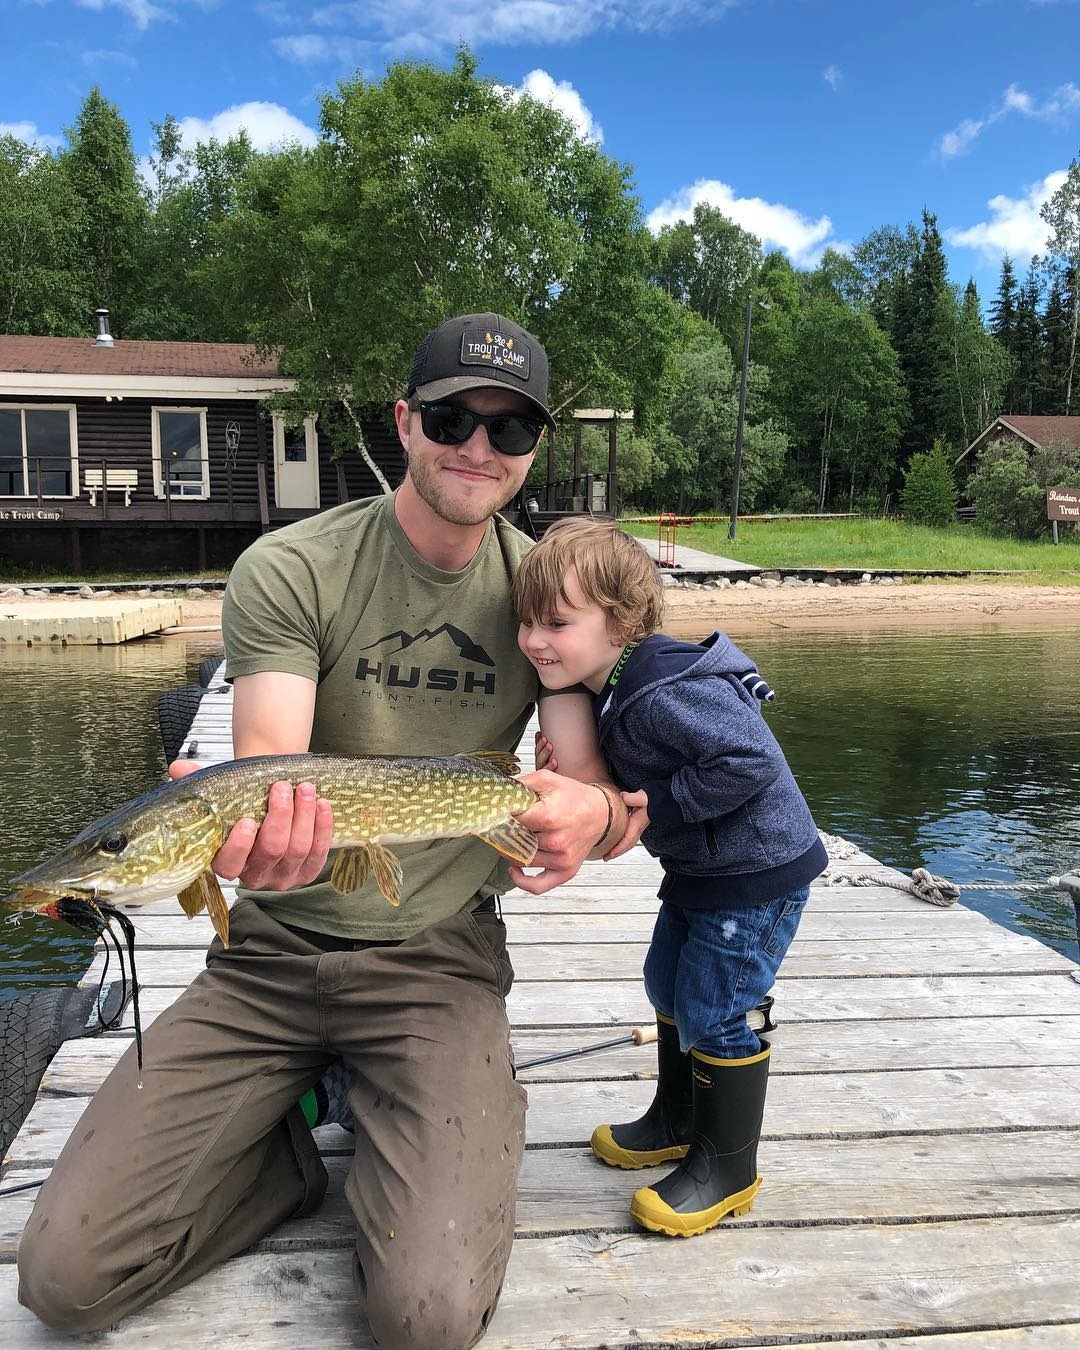 Reindeer Lake Trout Camp - Fishing from the dock